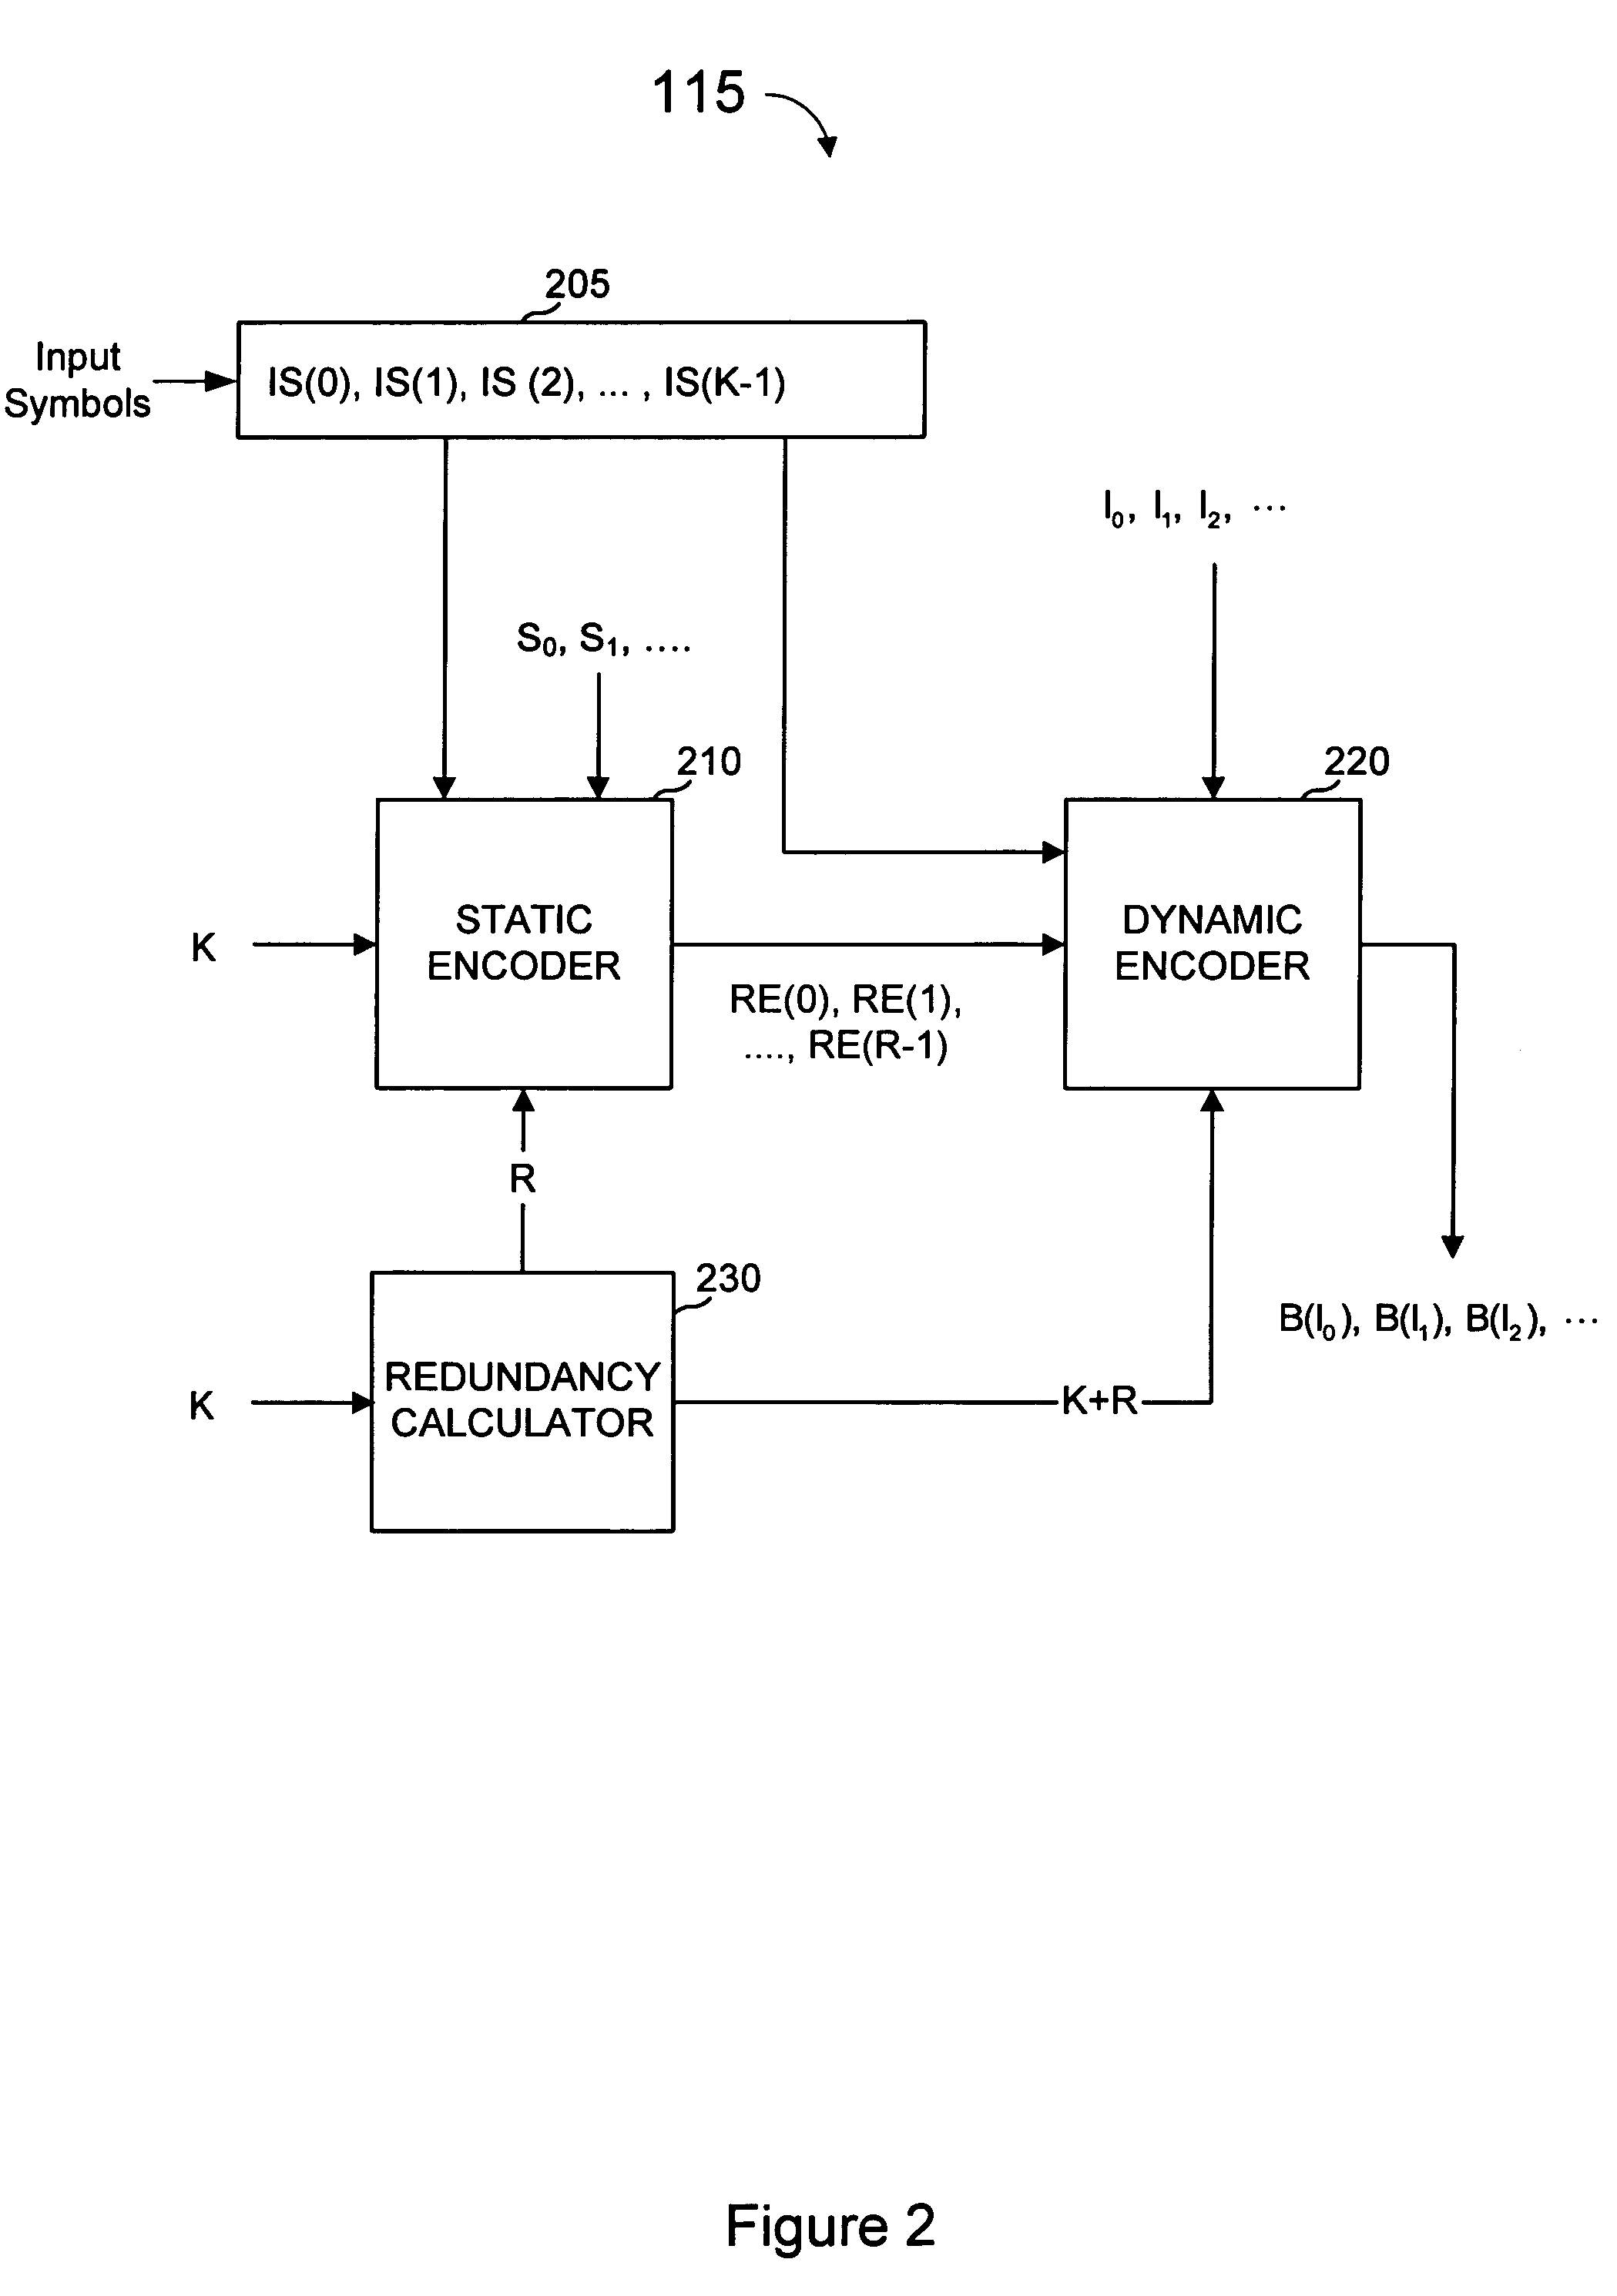 Error-correcting multi-stage code generator and decoder for communication systems having single transmitters or multiple transmitters